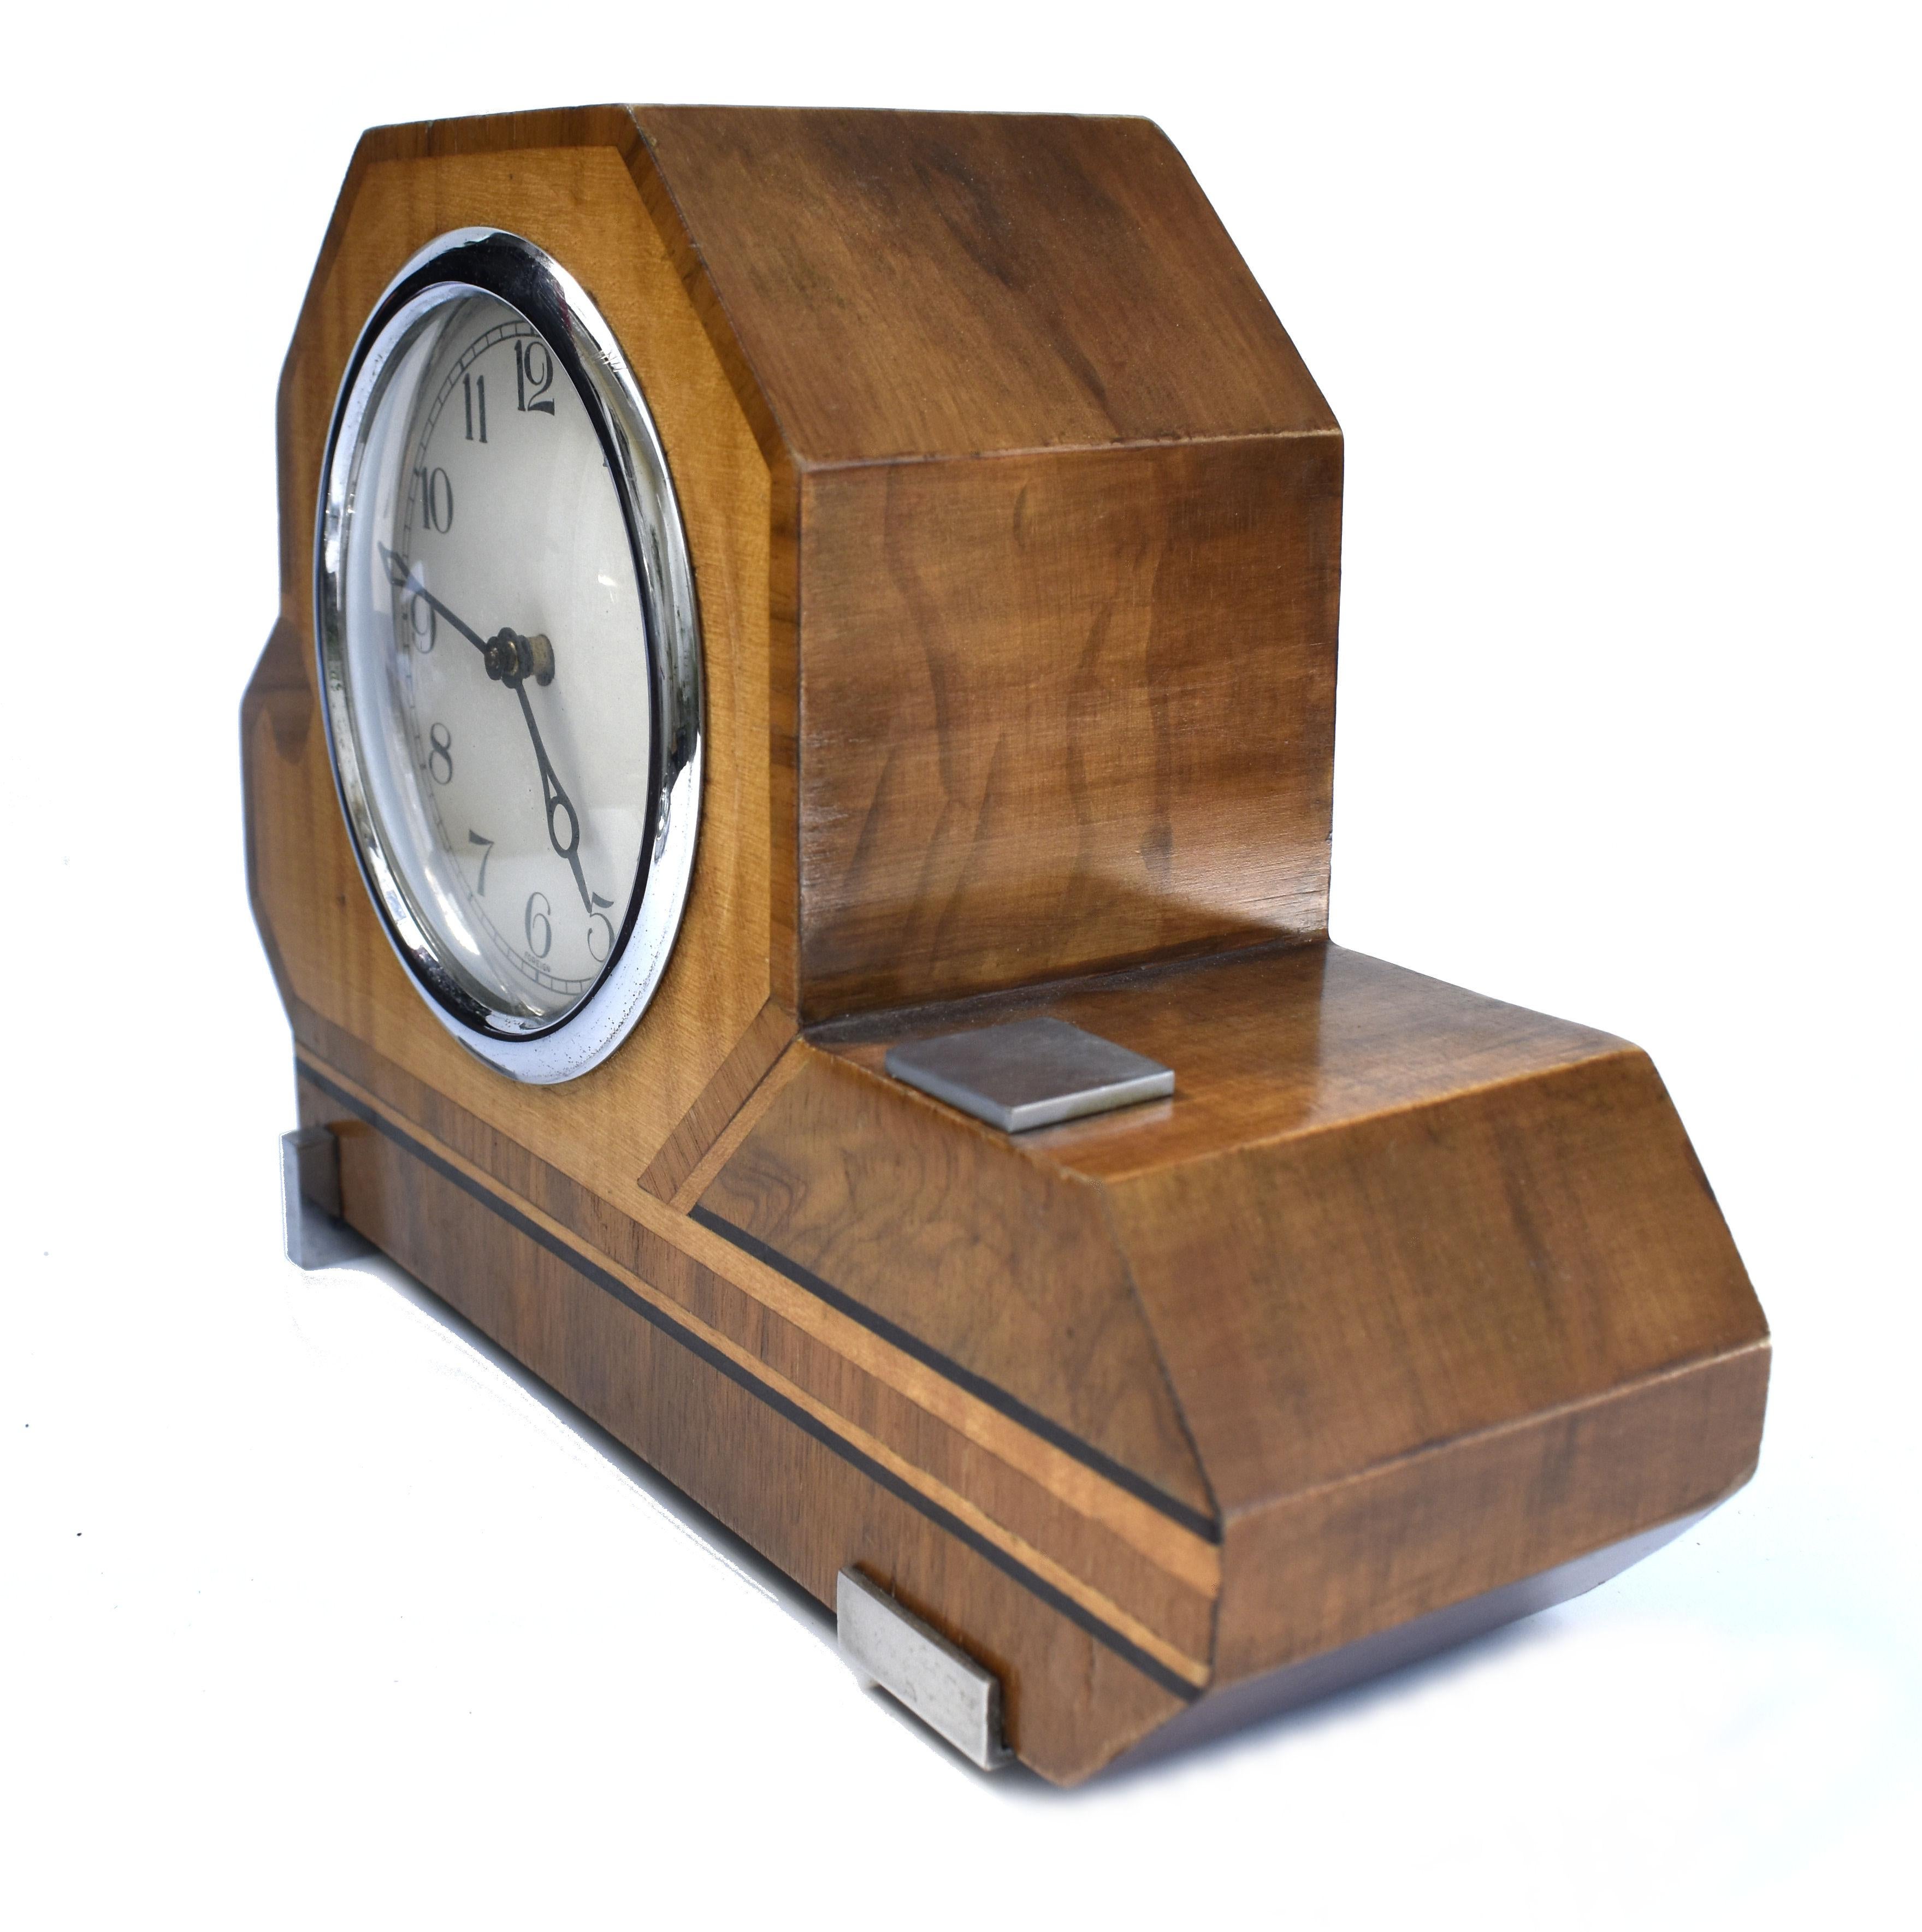 Art Deco Geometric Two Tone Wooden Mantle Clock, English, c1930 In Good Condition For Sale In Devon, England